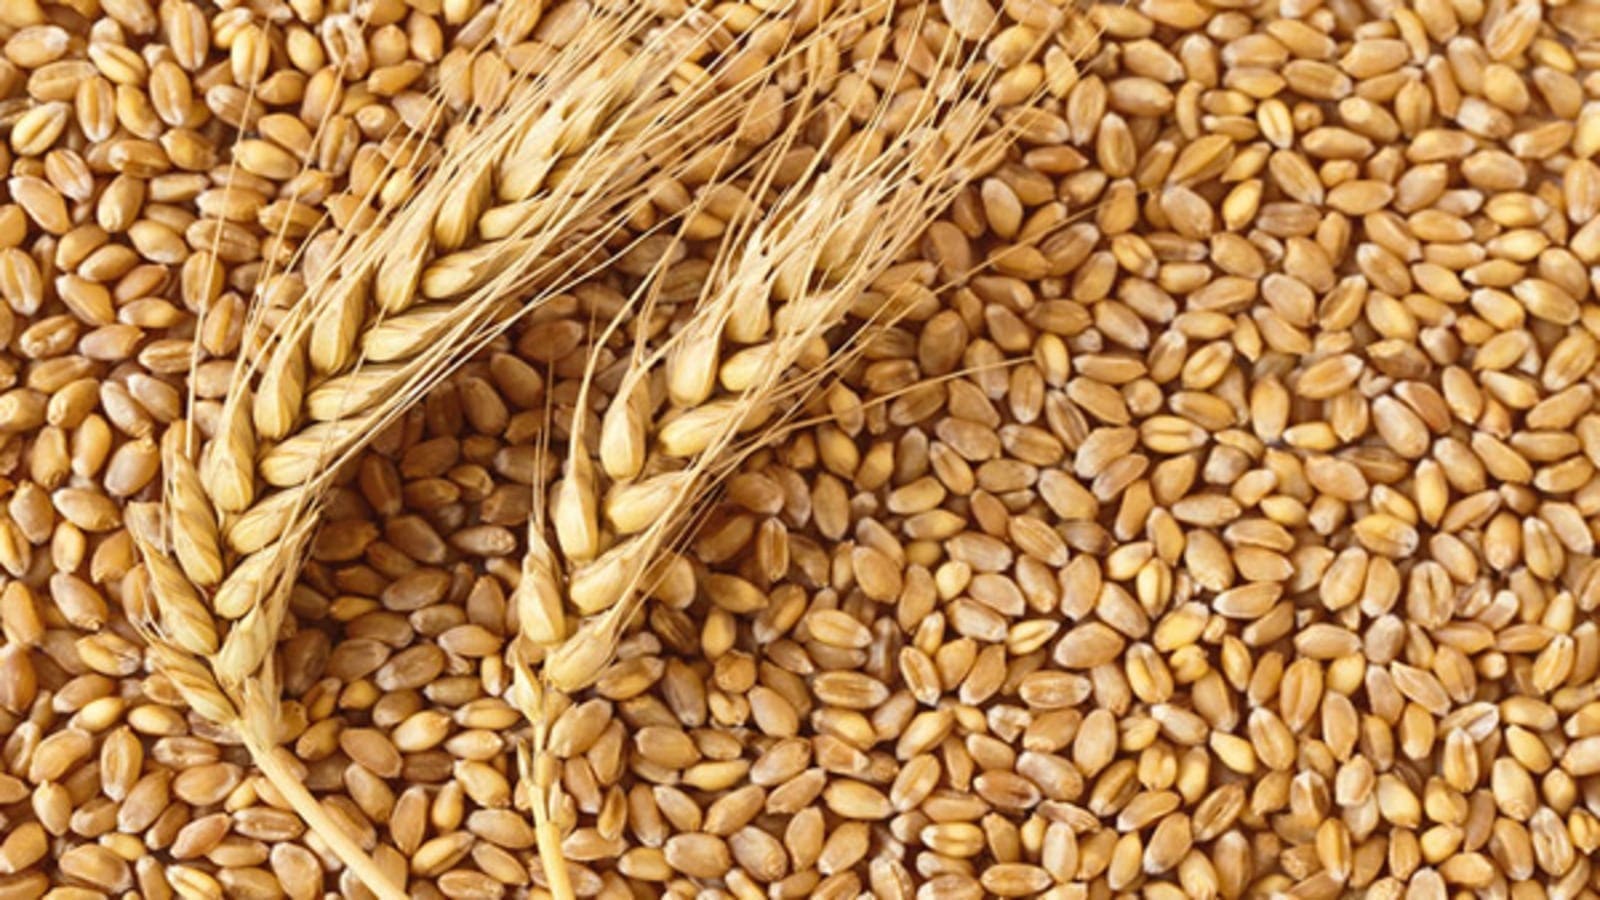 India’s grain production to hit record 305.4MMT as govt doubles down on food relief program